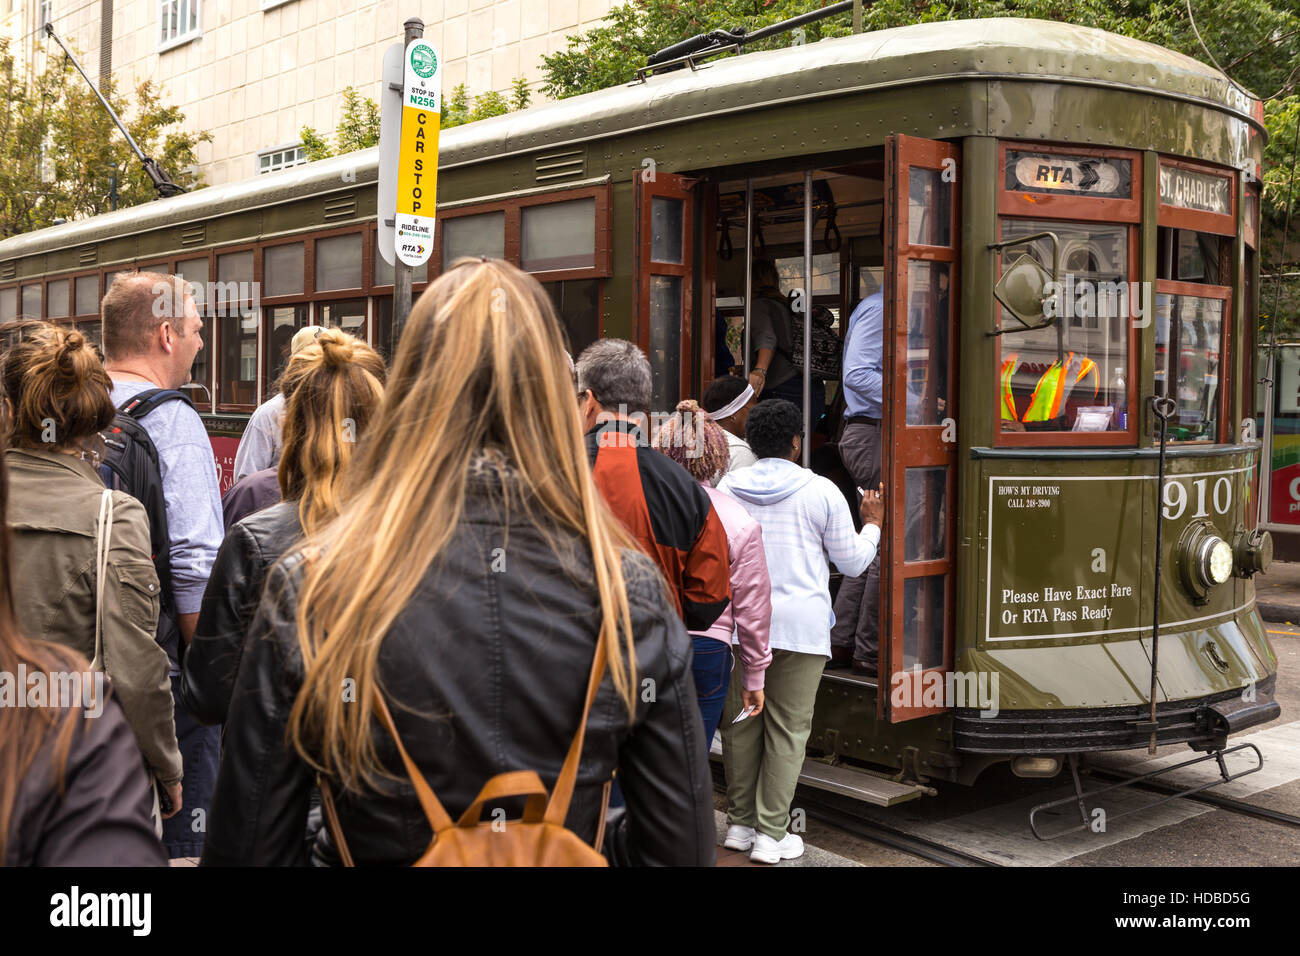 Passengers board an RTA St Charles Line streetcar at the Canal and Carondelet stop in New Orleans, Louisiana. Stock Photo